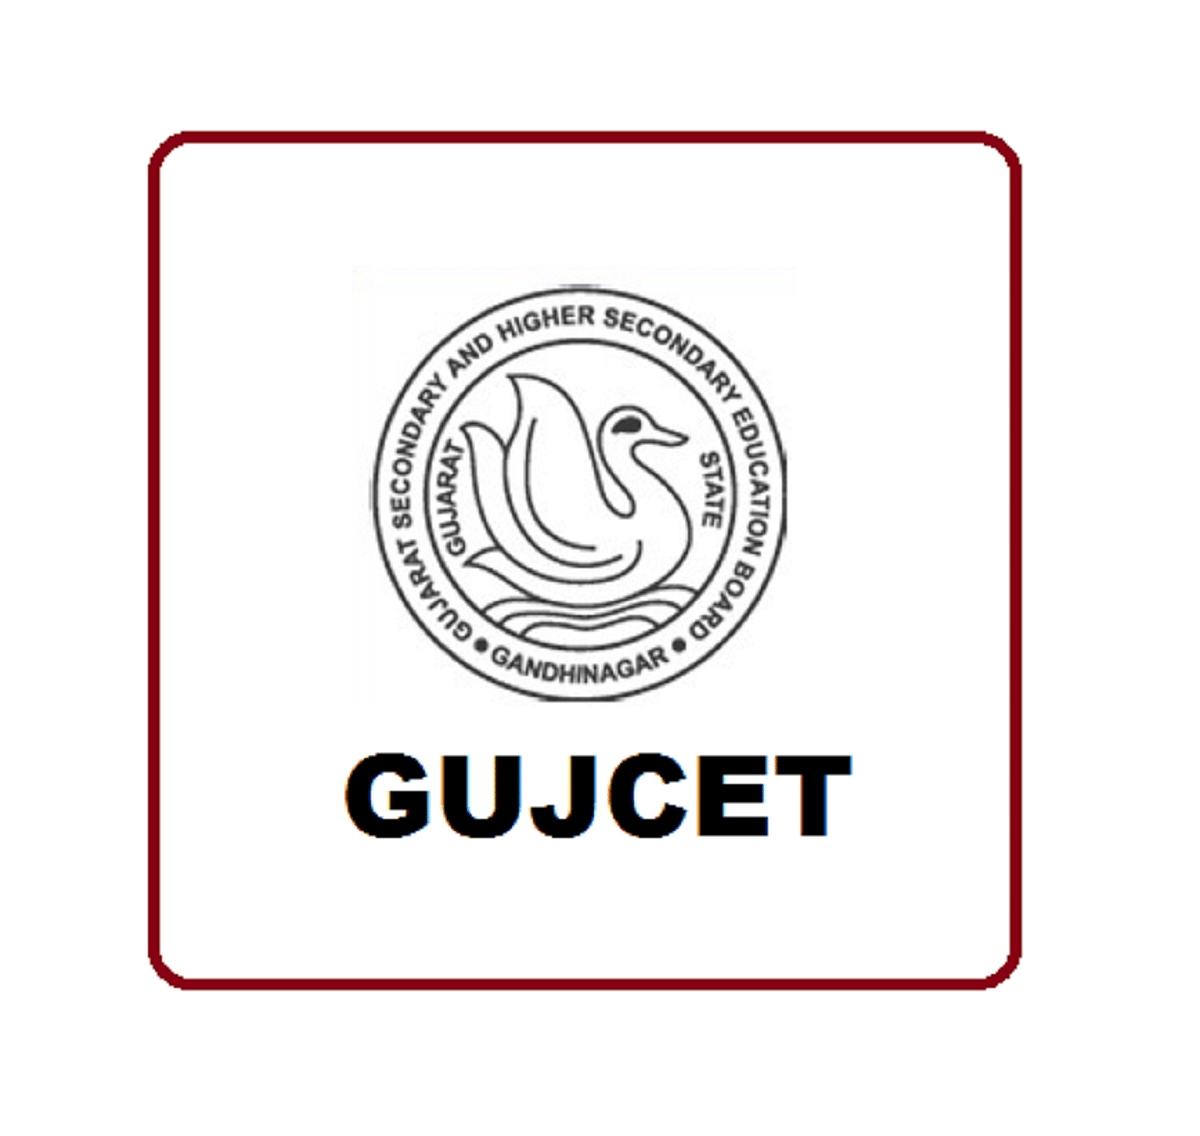 GUJCET 2020 Answer Key Expected Soon, Know How to Download